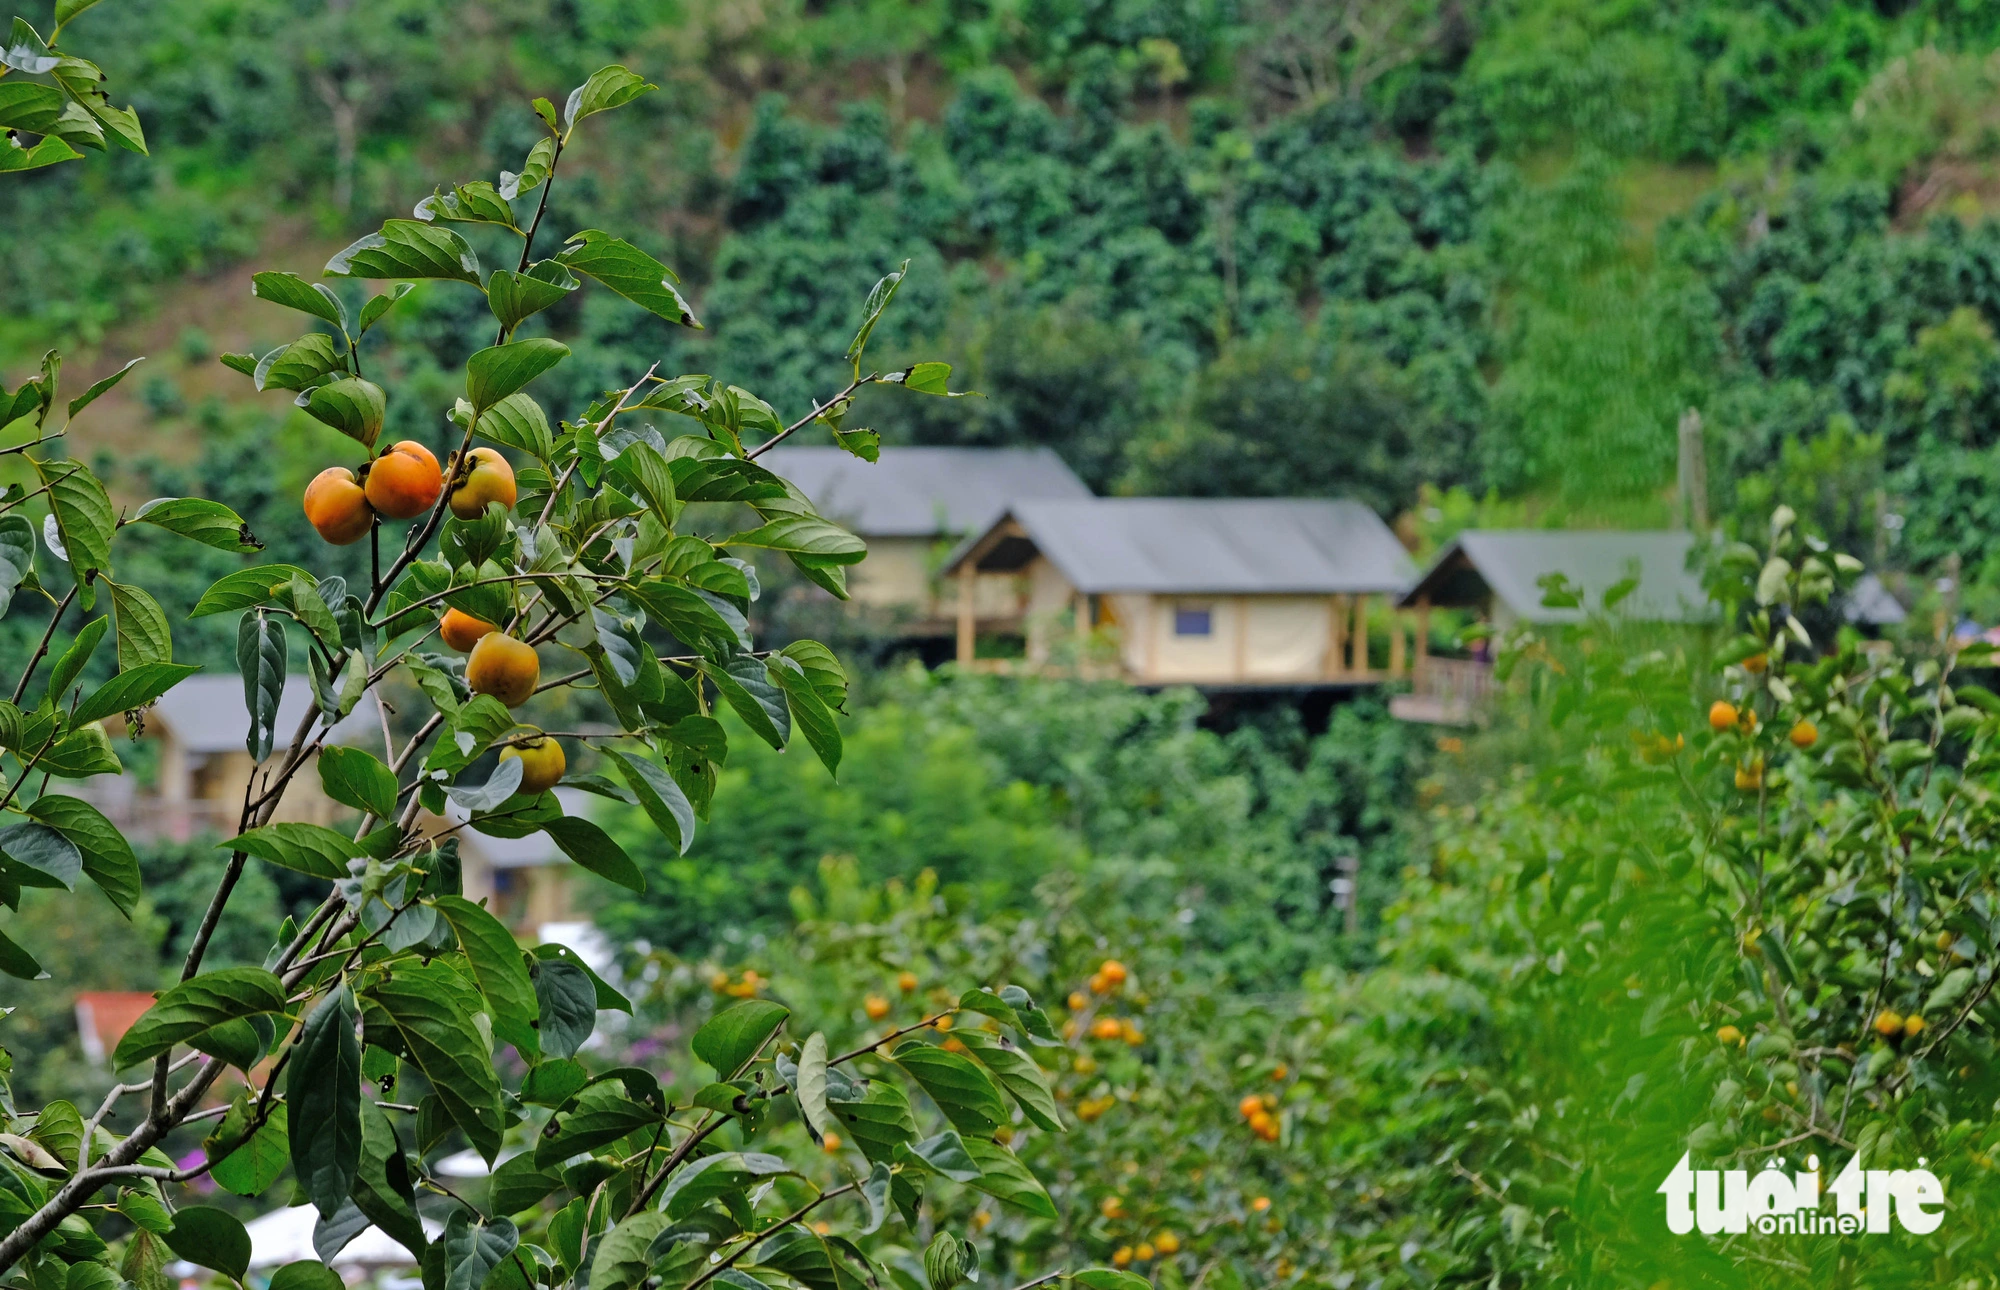 Ripening persimmon gardens attract tourists to Da Lat in winter